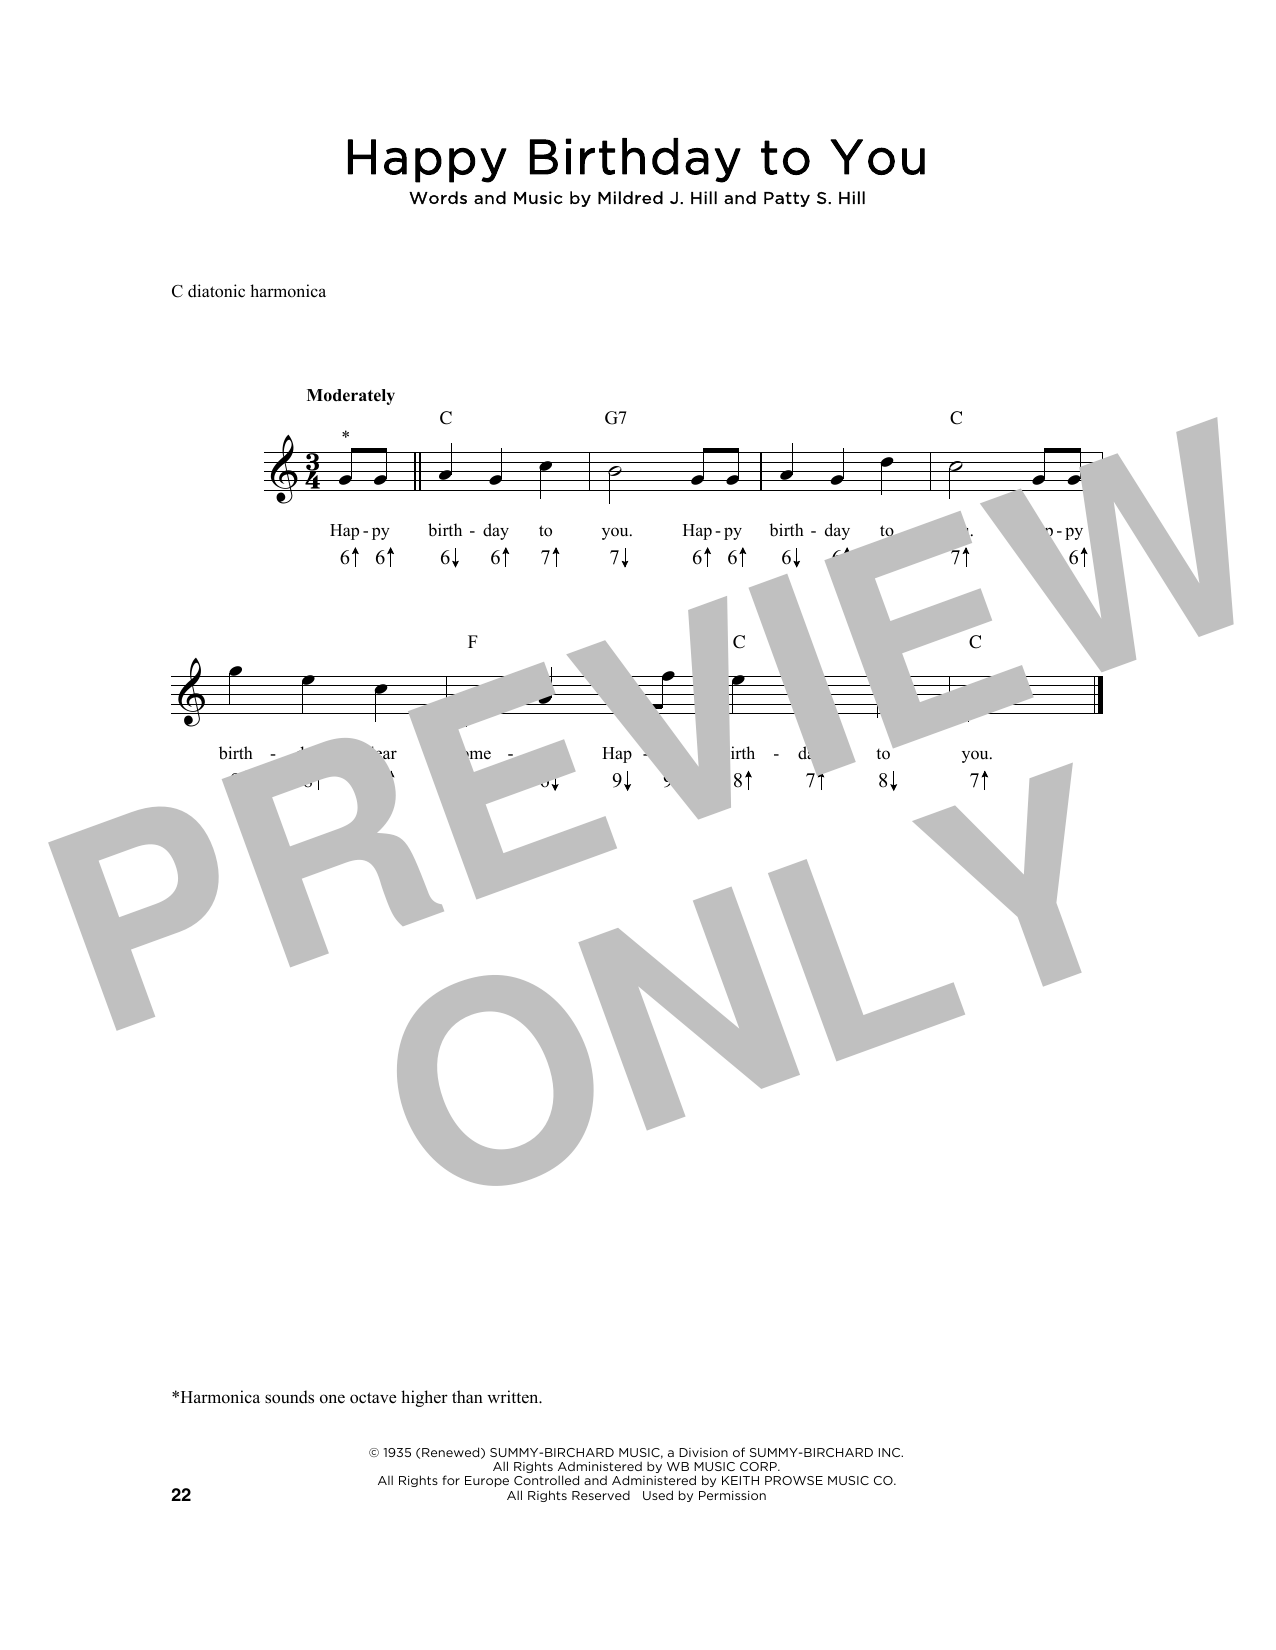 Download Mildred & Patty Hill Happy Birthday To You Sheet Music